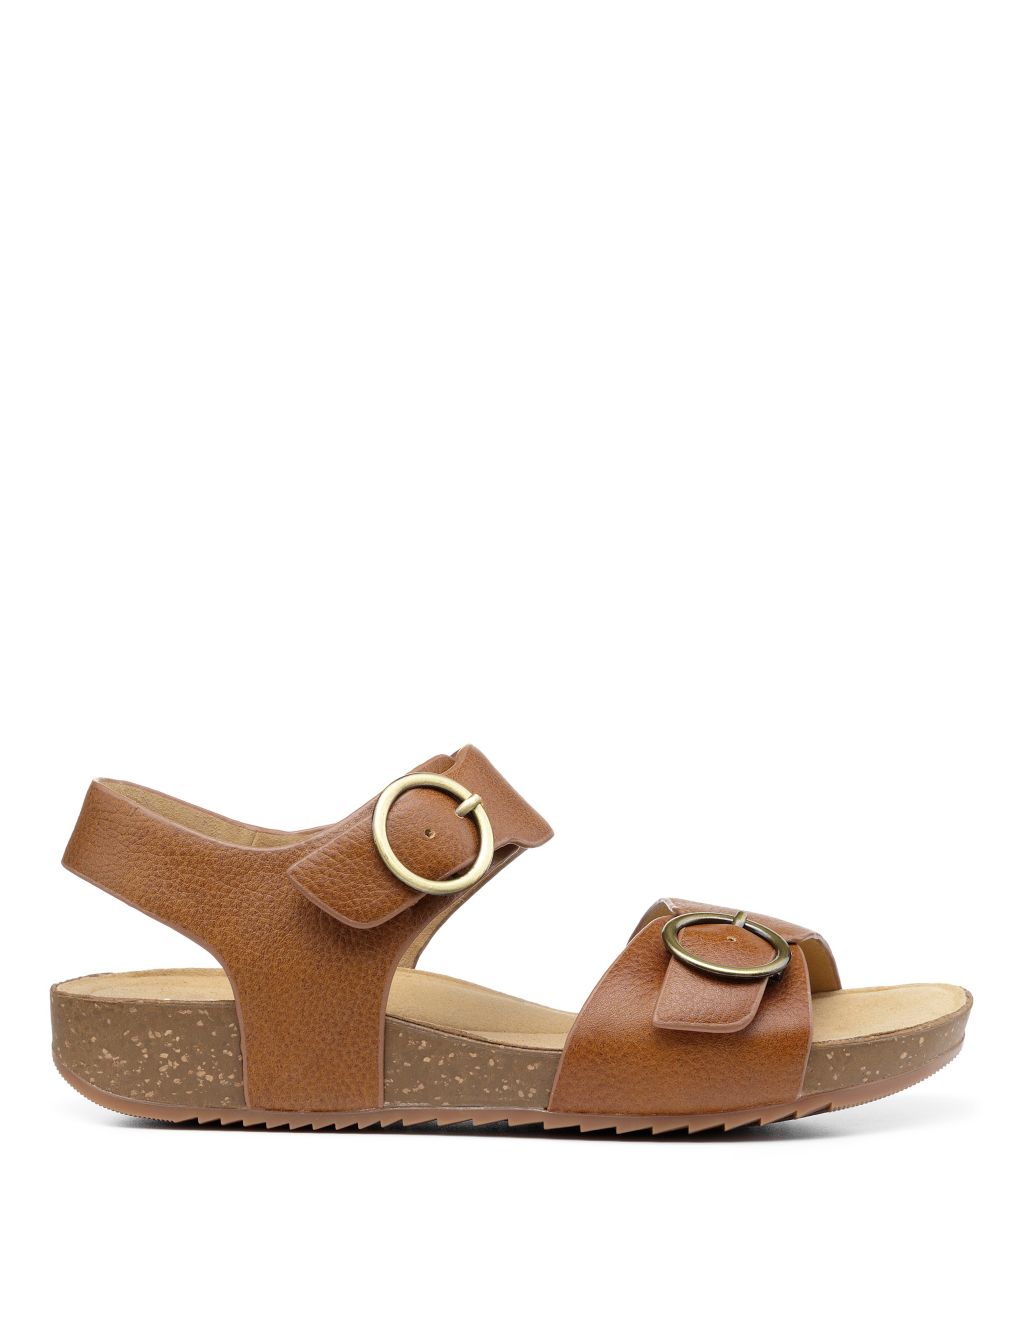 Tourist Wide Fit Leather Wedge Sandals image 1